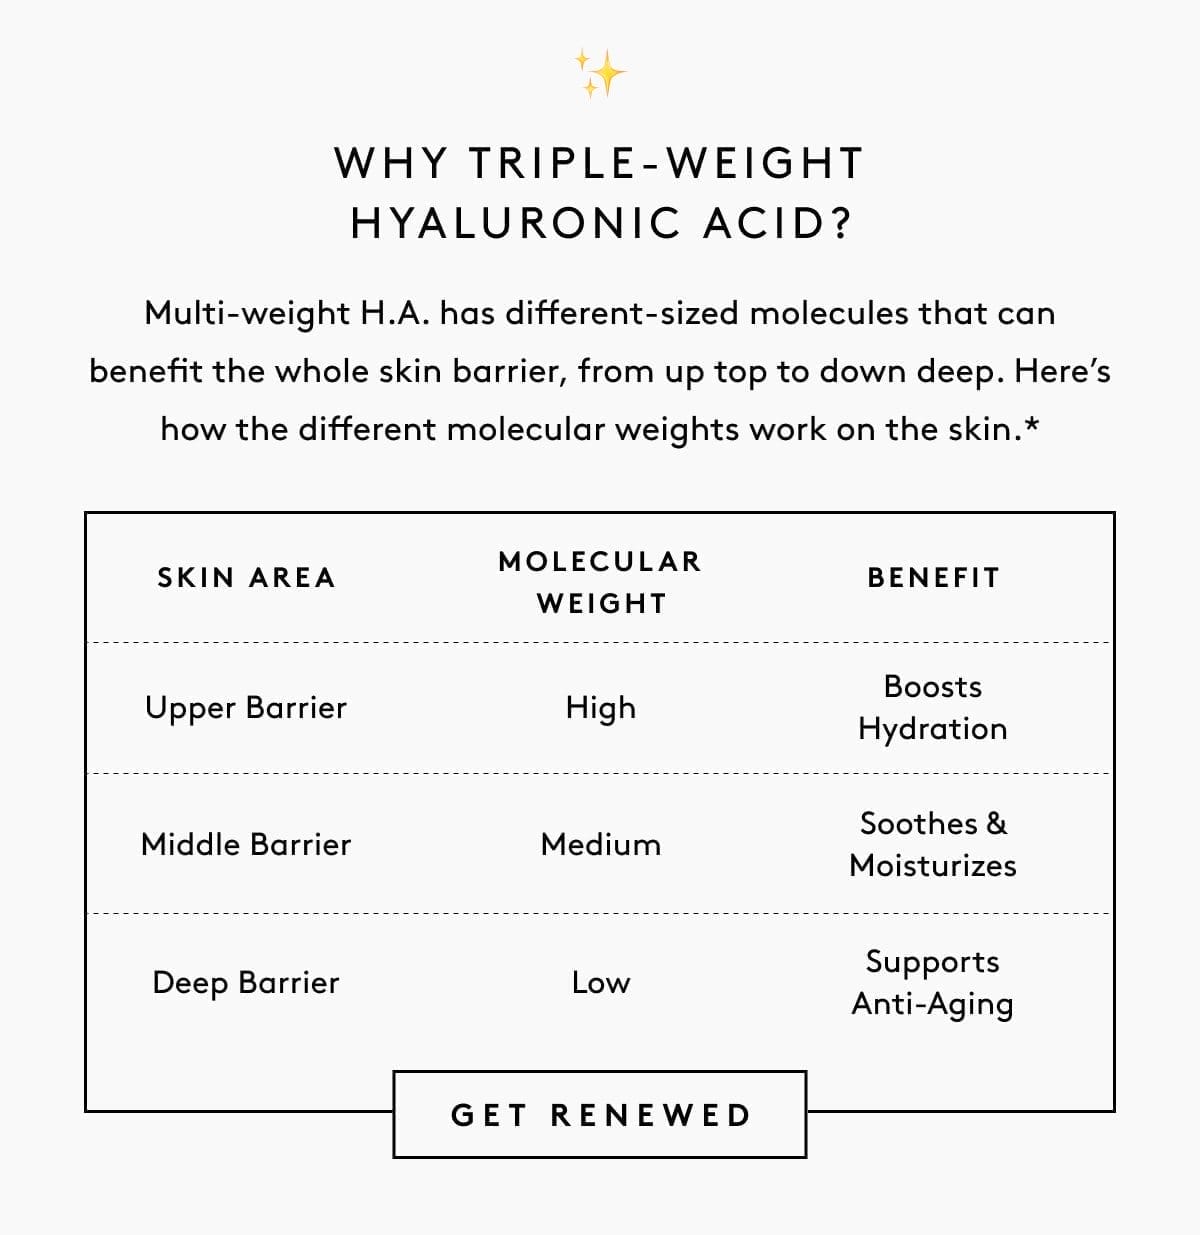 Why Triple-Weight Hyaluronic Acid?